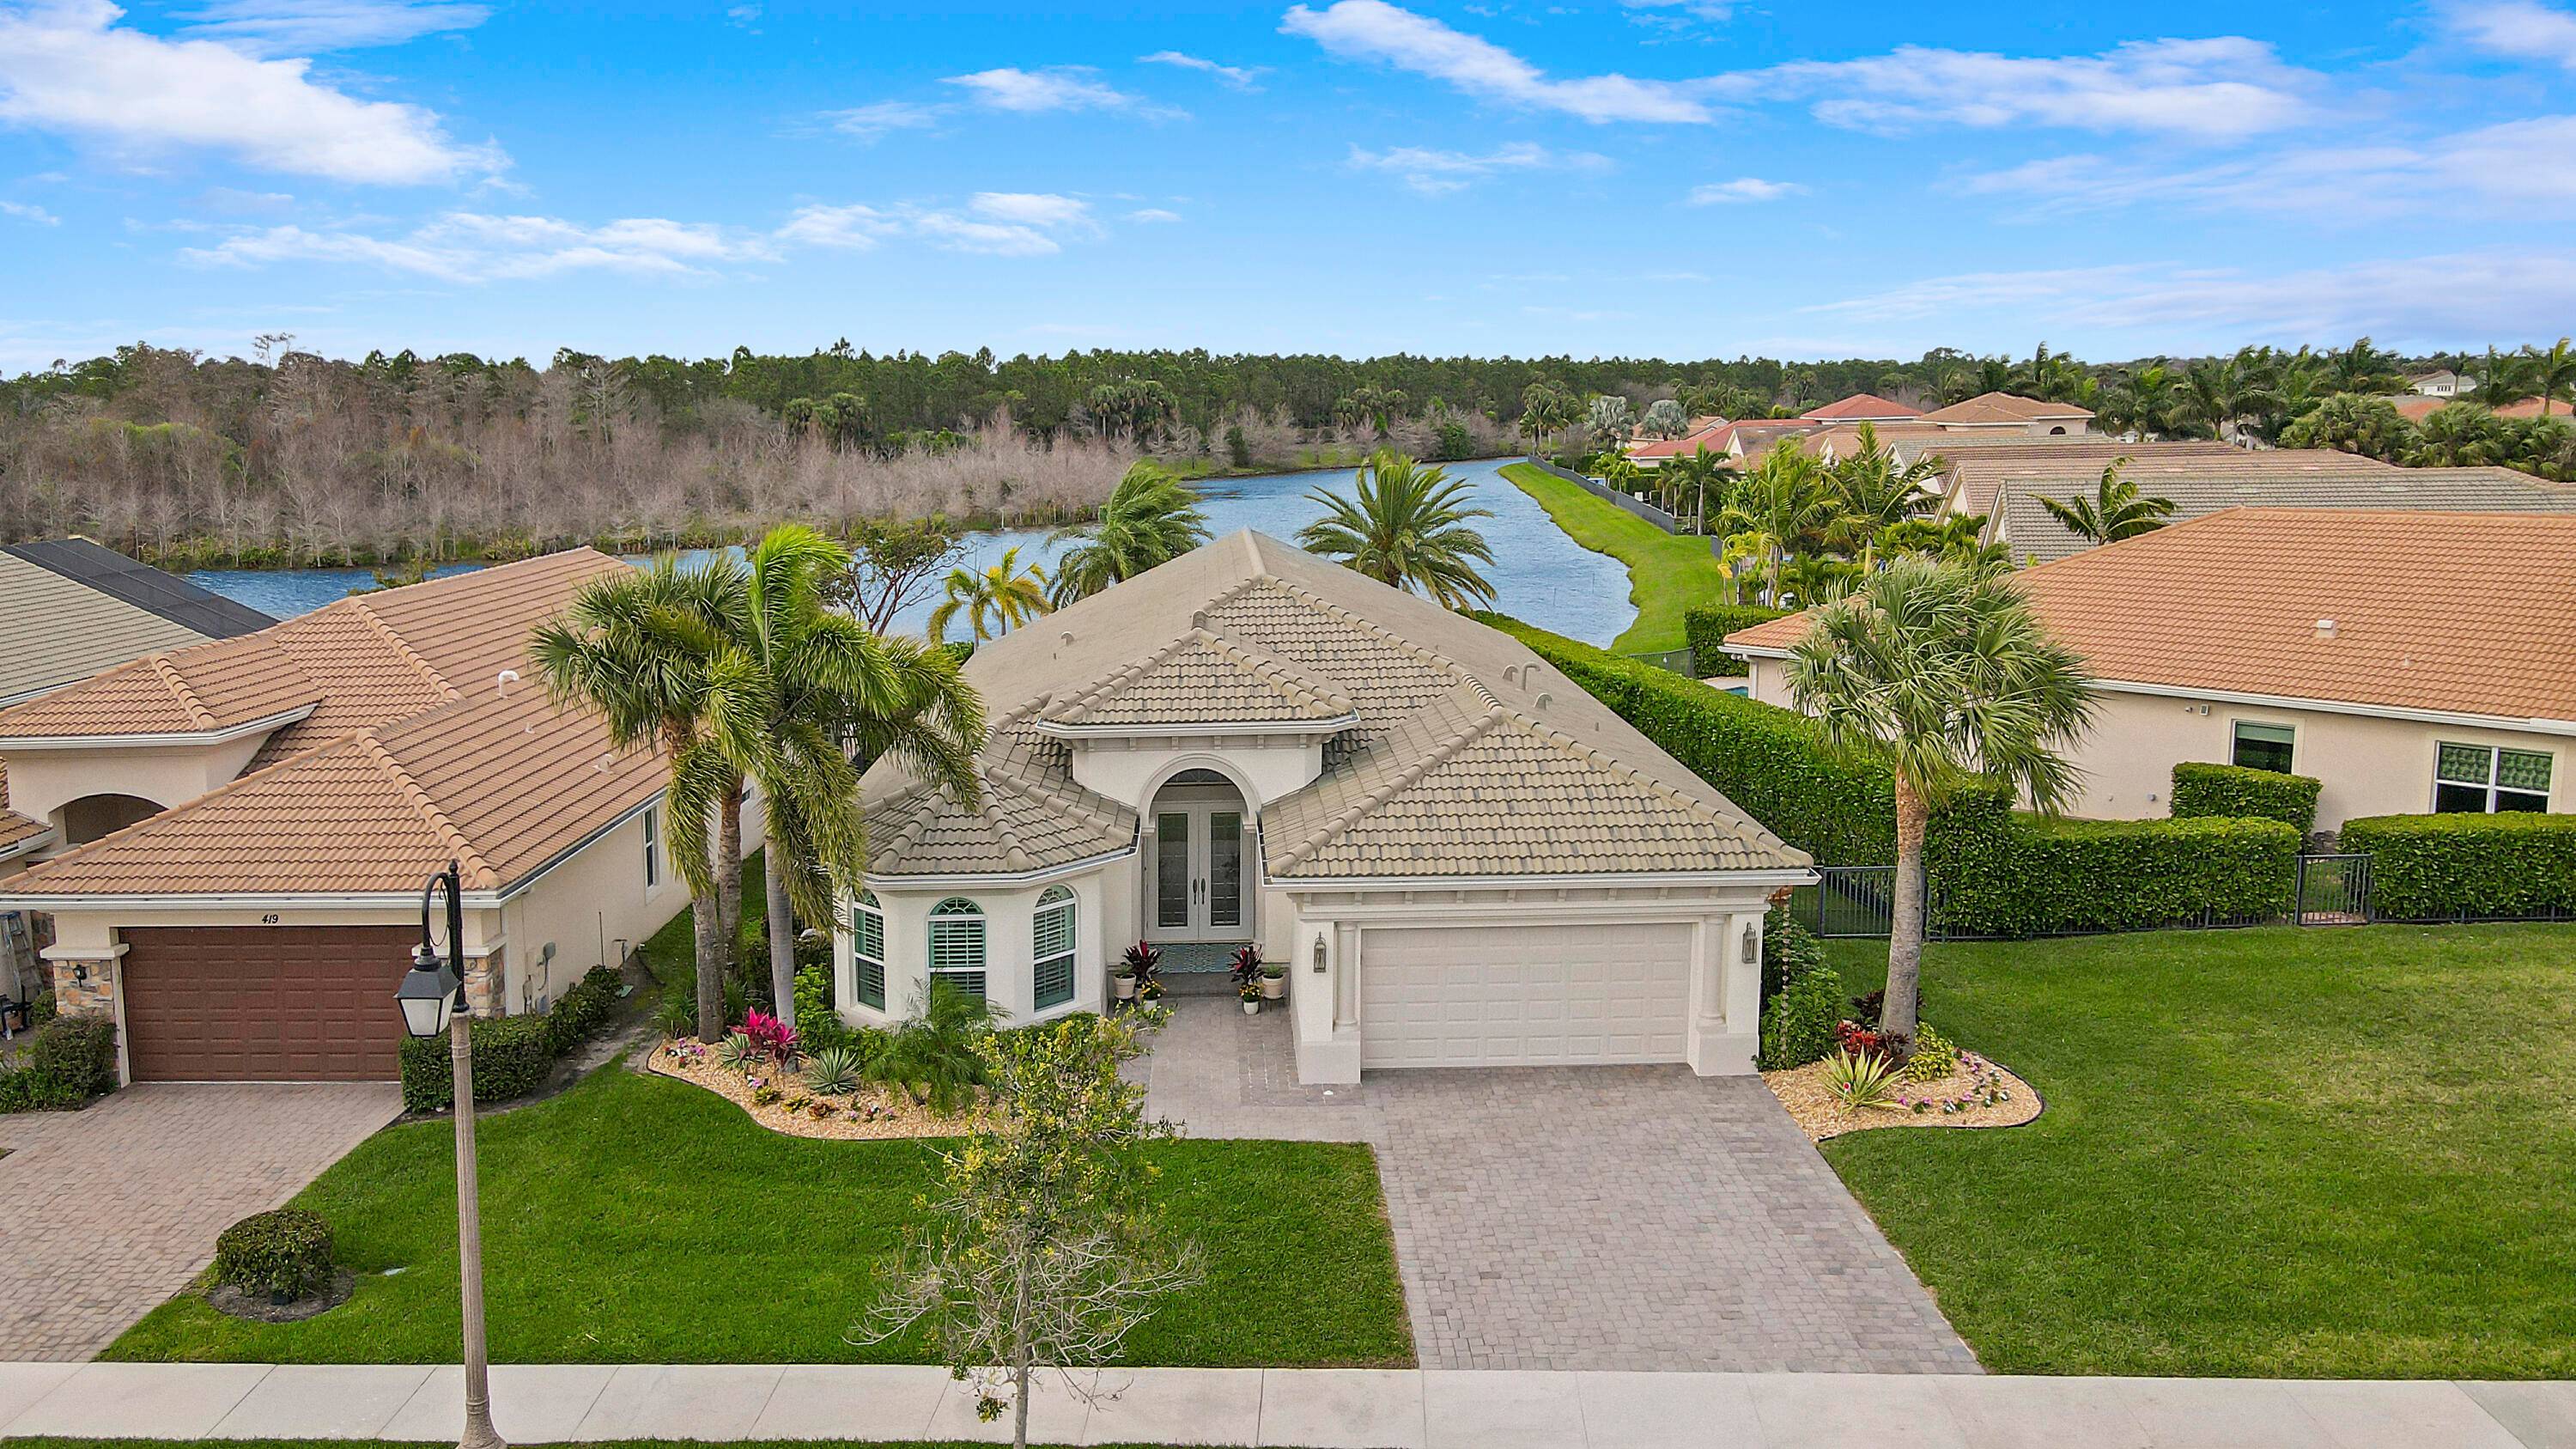 Welcome to your lakeside paradise in Jupiter Country Club.